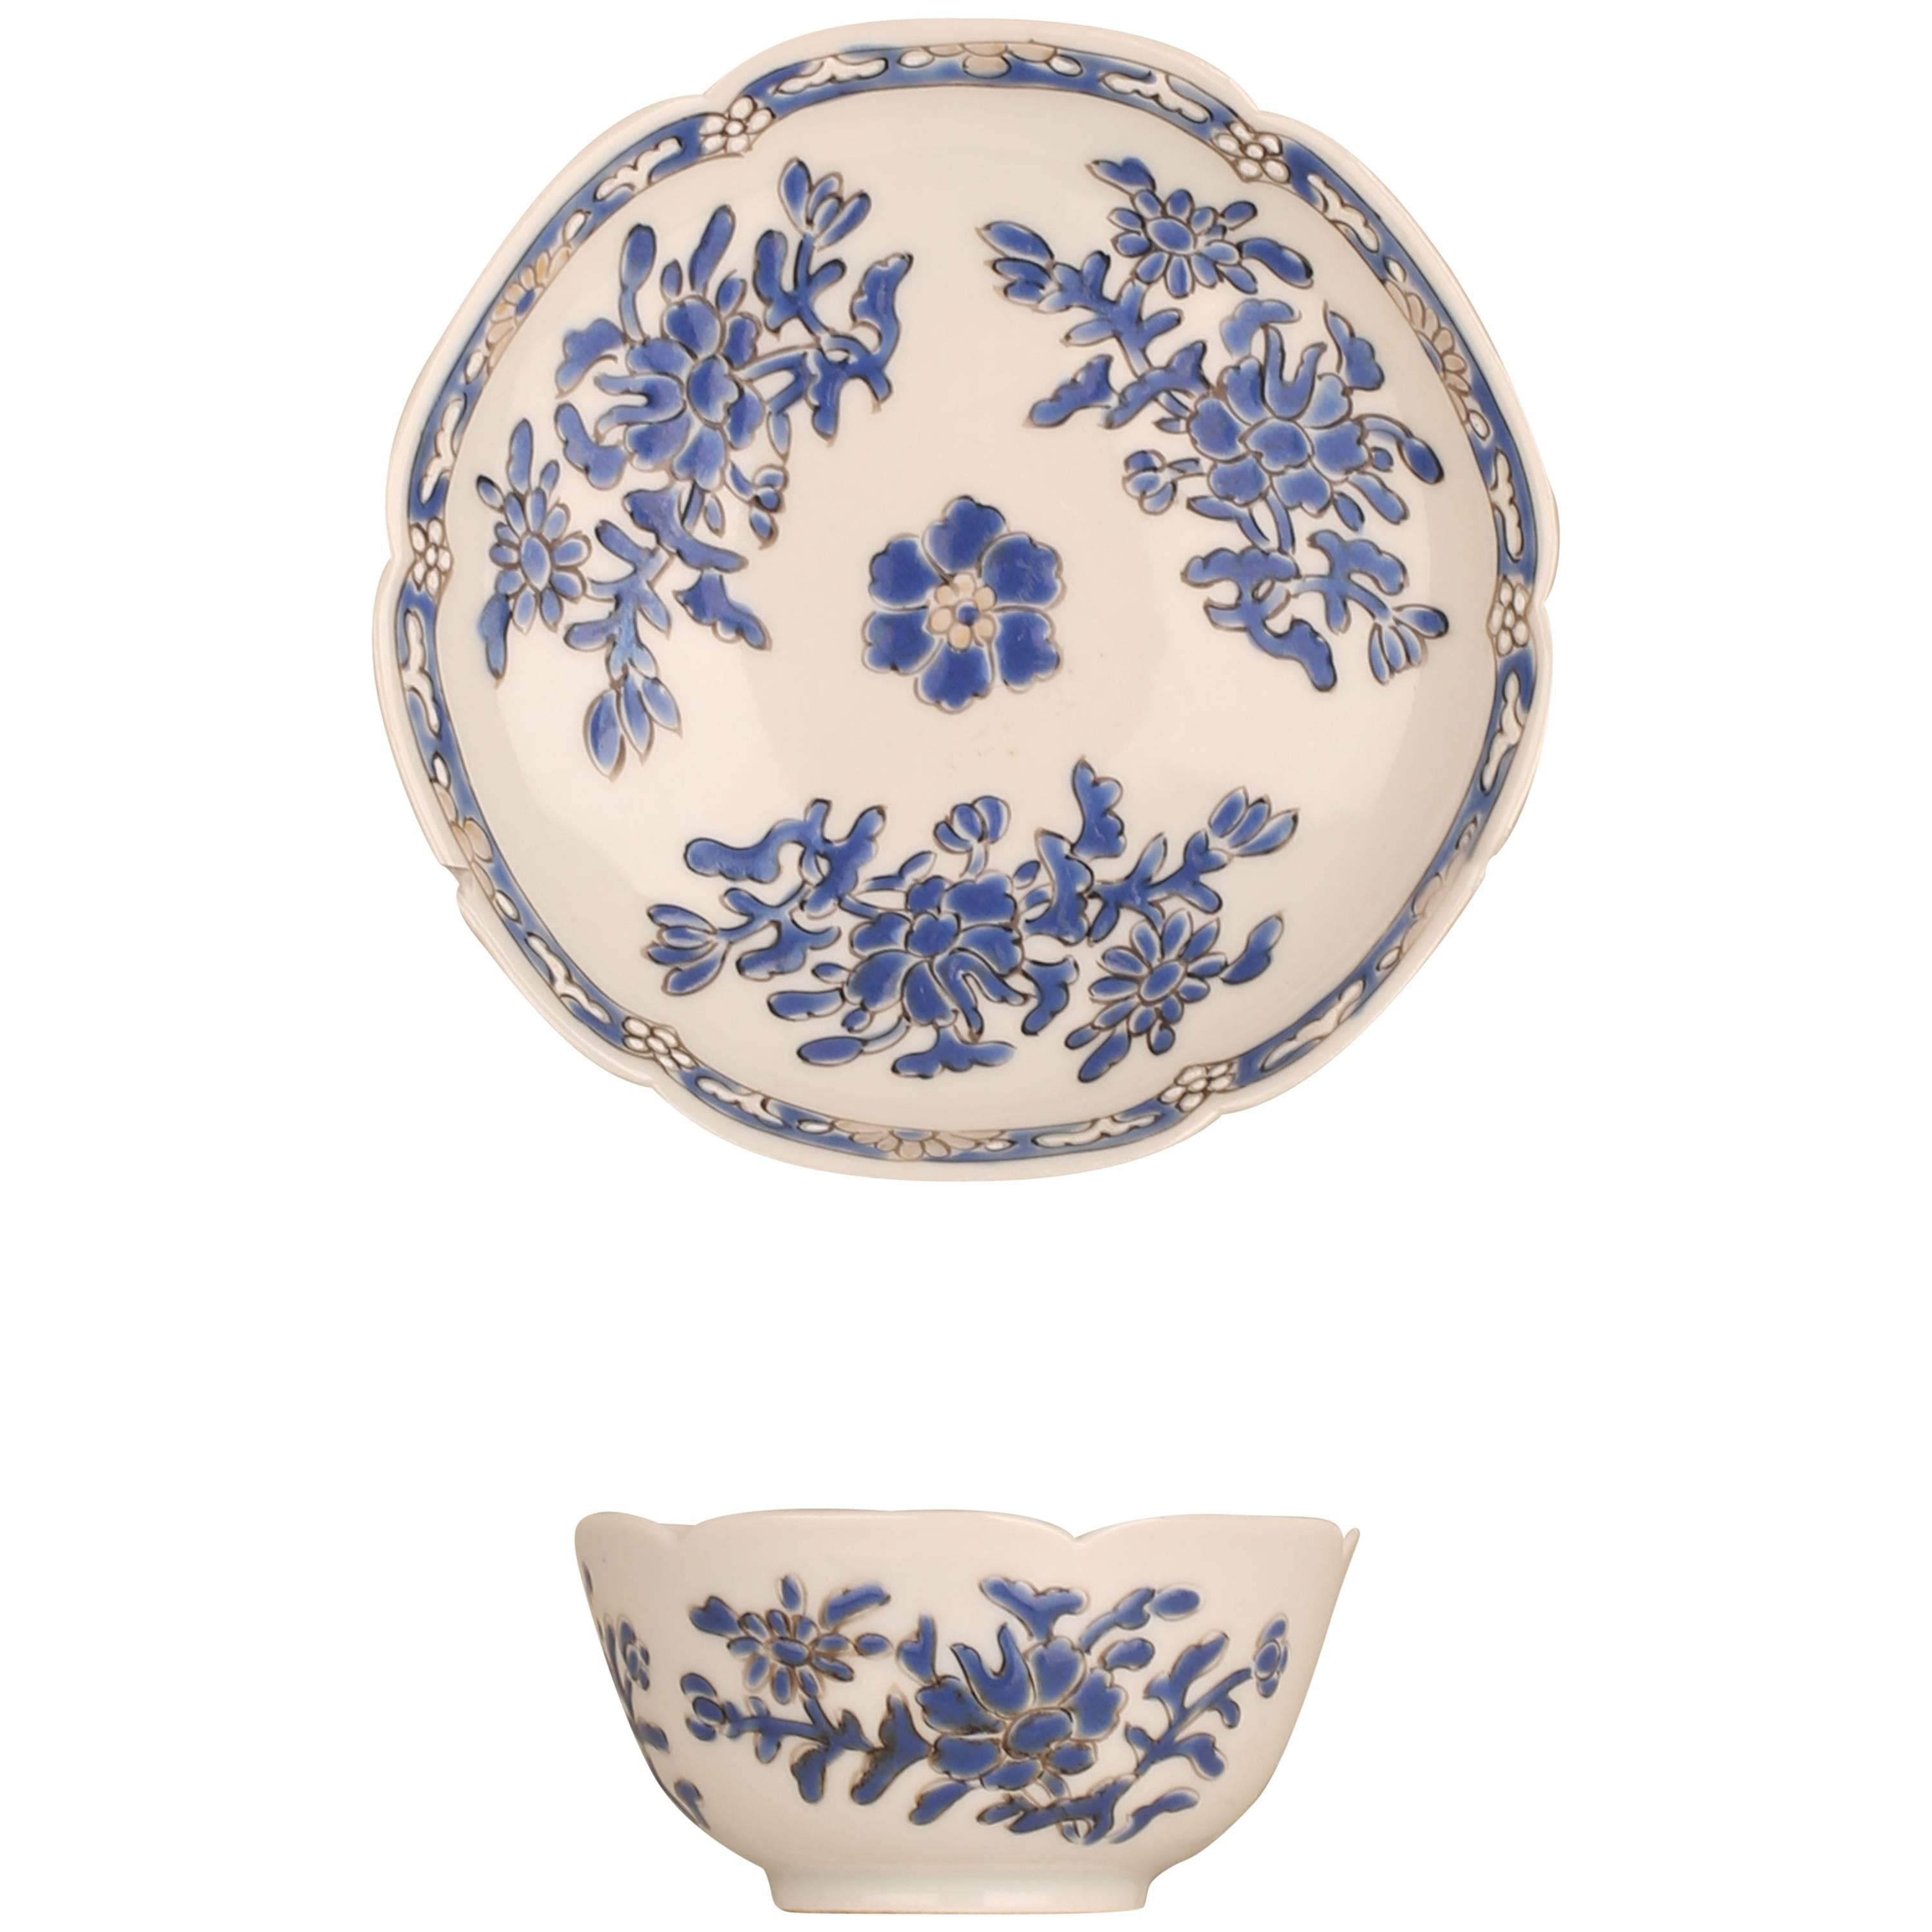 Chinese Export Porcelain Blue and White Enamel Cup and Saucer, 18th Century For Sale